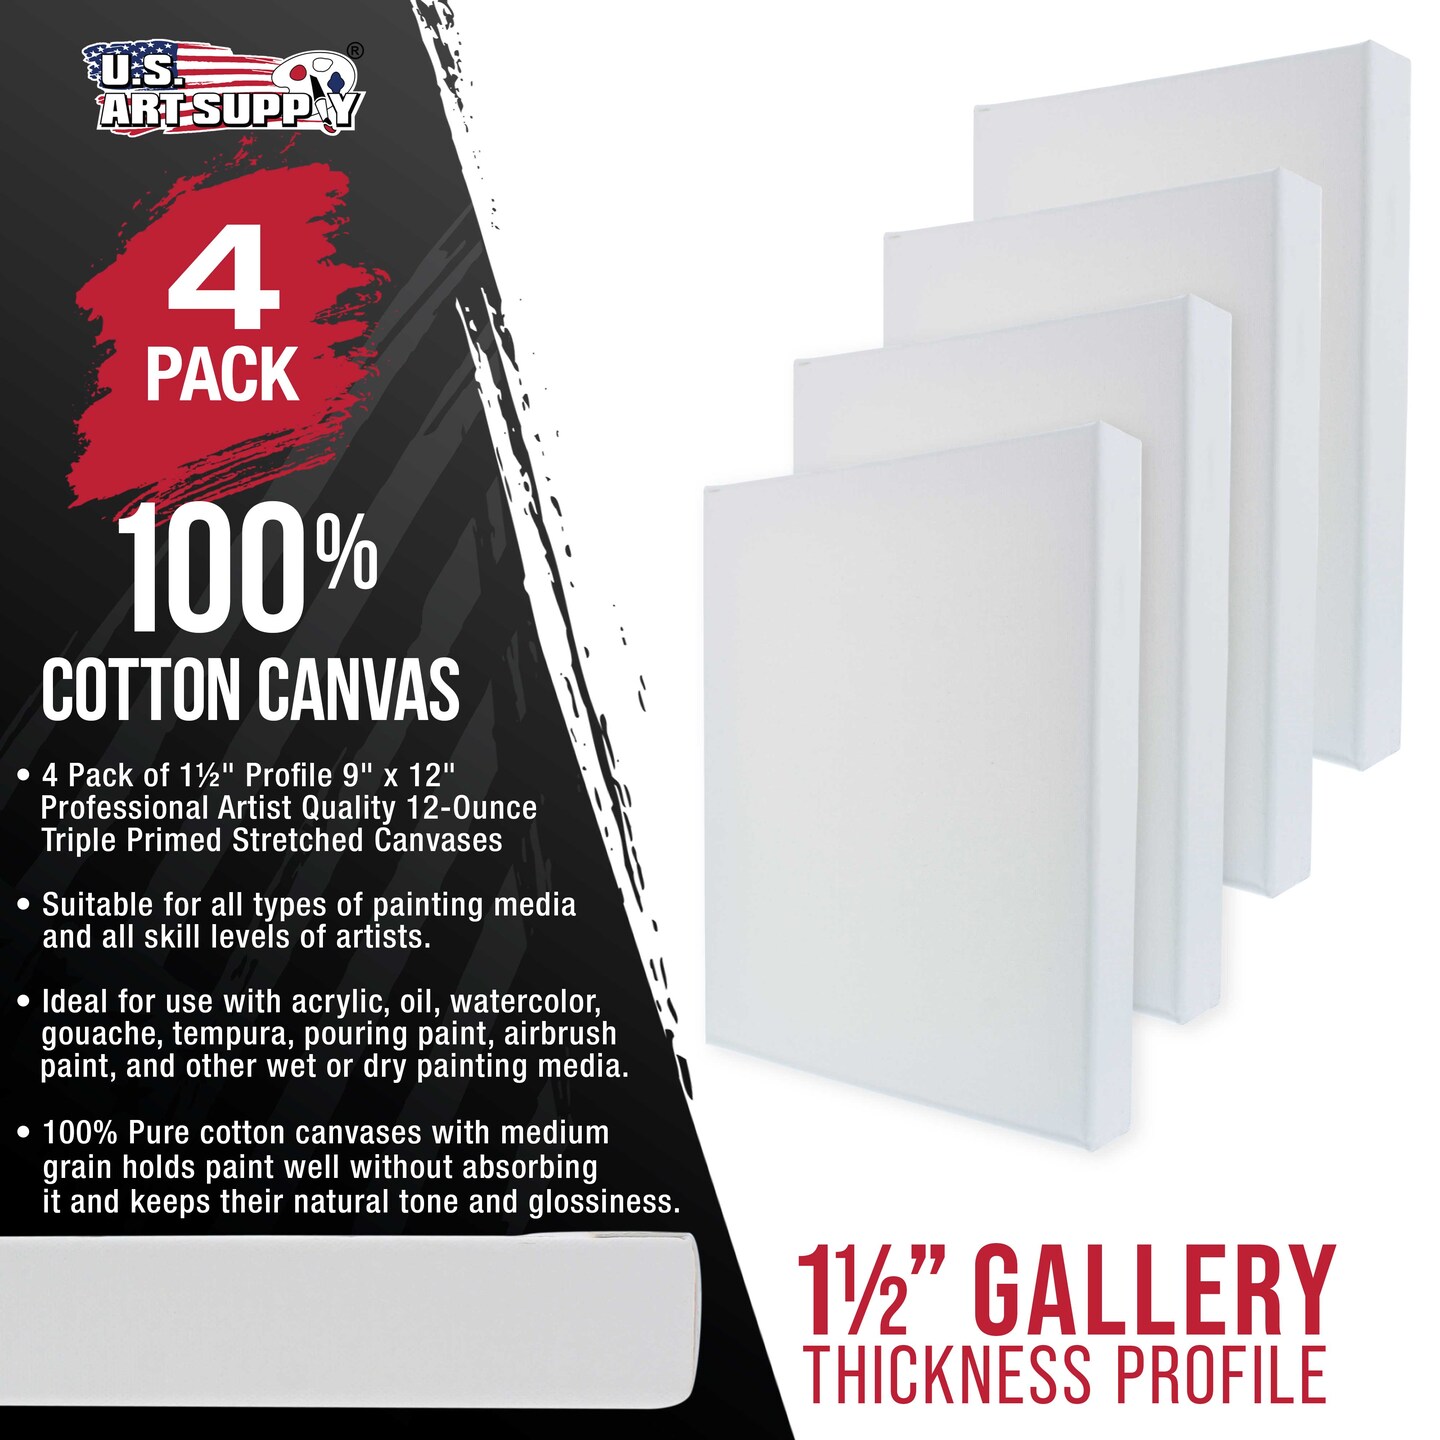 9 x 12 inch Gallery Depth 1-1/2&#x22; Profile Stretched Canvas, 4-Pack - 12-Ounce Acrylic Gesso Triple Primed, - Professional Artist Quality, 100% Cotton